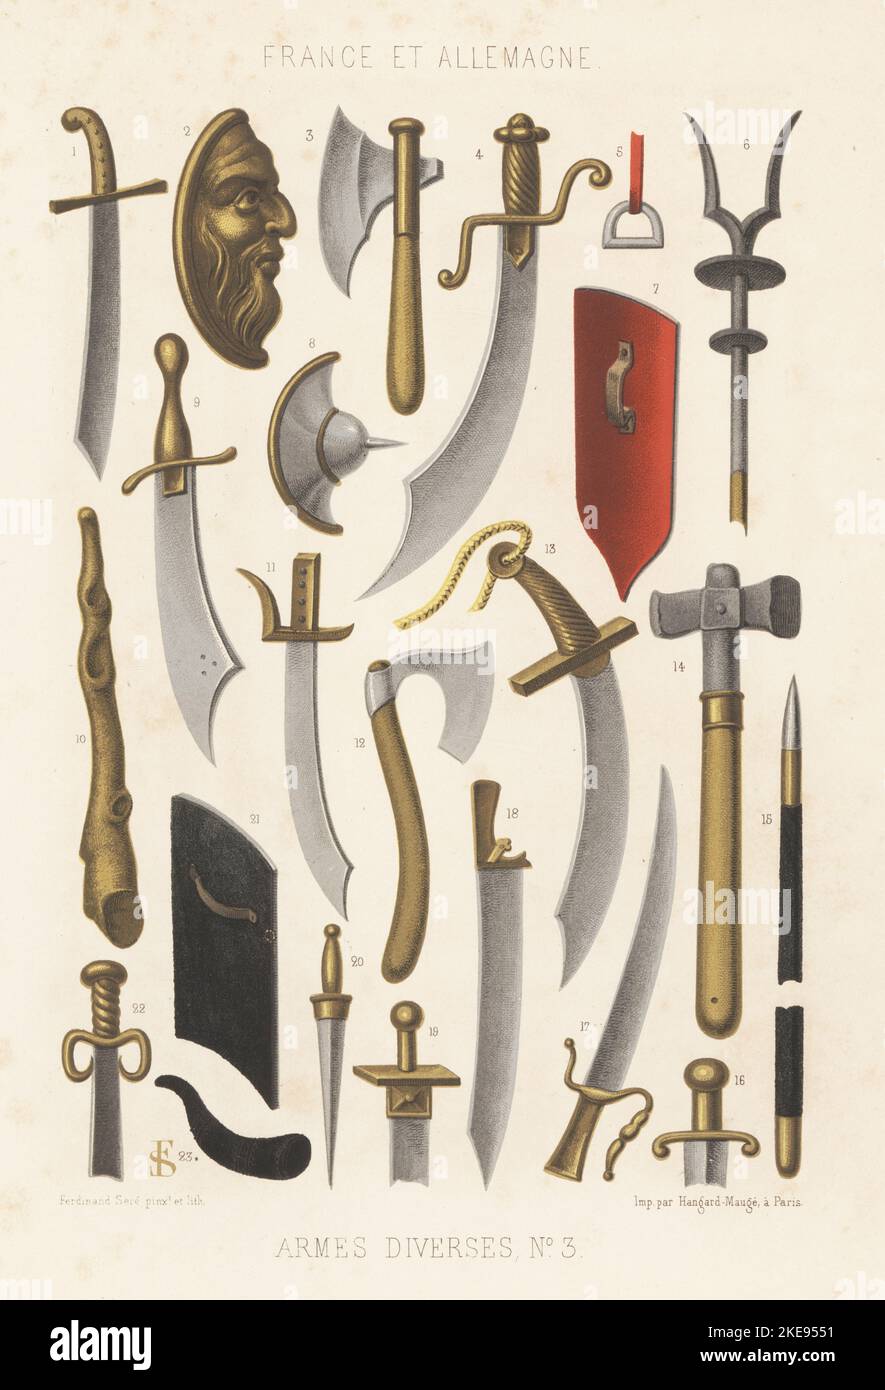 Military weapons, France and Germany, 15th century. Scimitar, stirrup, battle axe, battle hammer, dagger, poignard, sabre, buckler, shield, club, etc. Armes diverses, No. 3, France et Allemagne, XVe siecle. Chromolithograph by Ferdinand Sere from Charles Louandre’s Les Arts Somptuaires, The Sumptuary Arts, Hangard-Mauge, Paris, 1858. Stock Photo